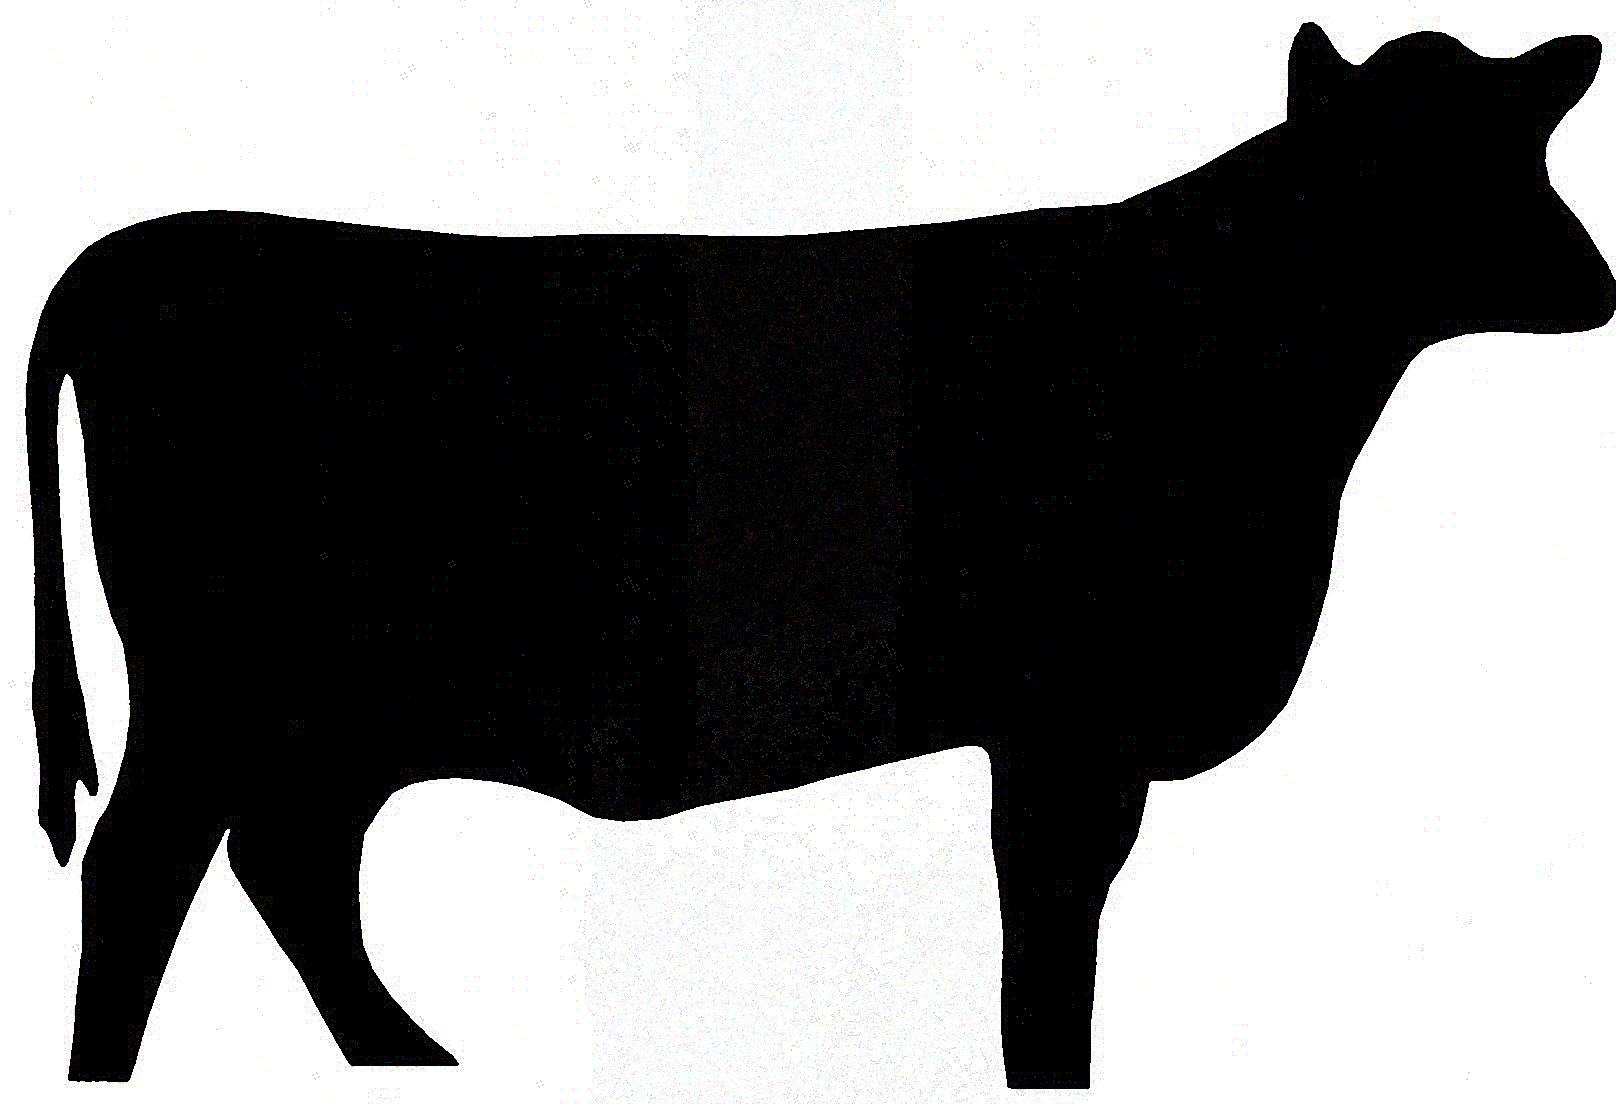 Beef Cow Silhouette | Clipart Panda - Free Clipart Images